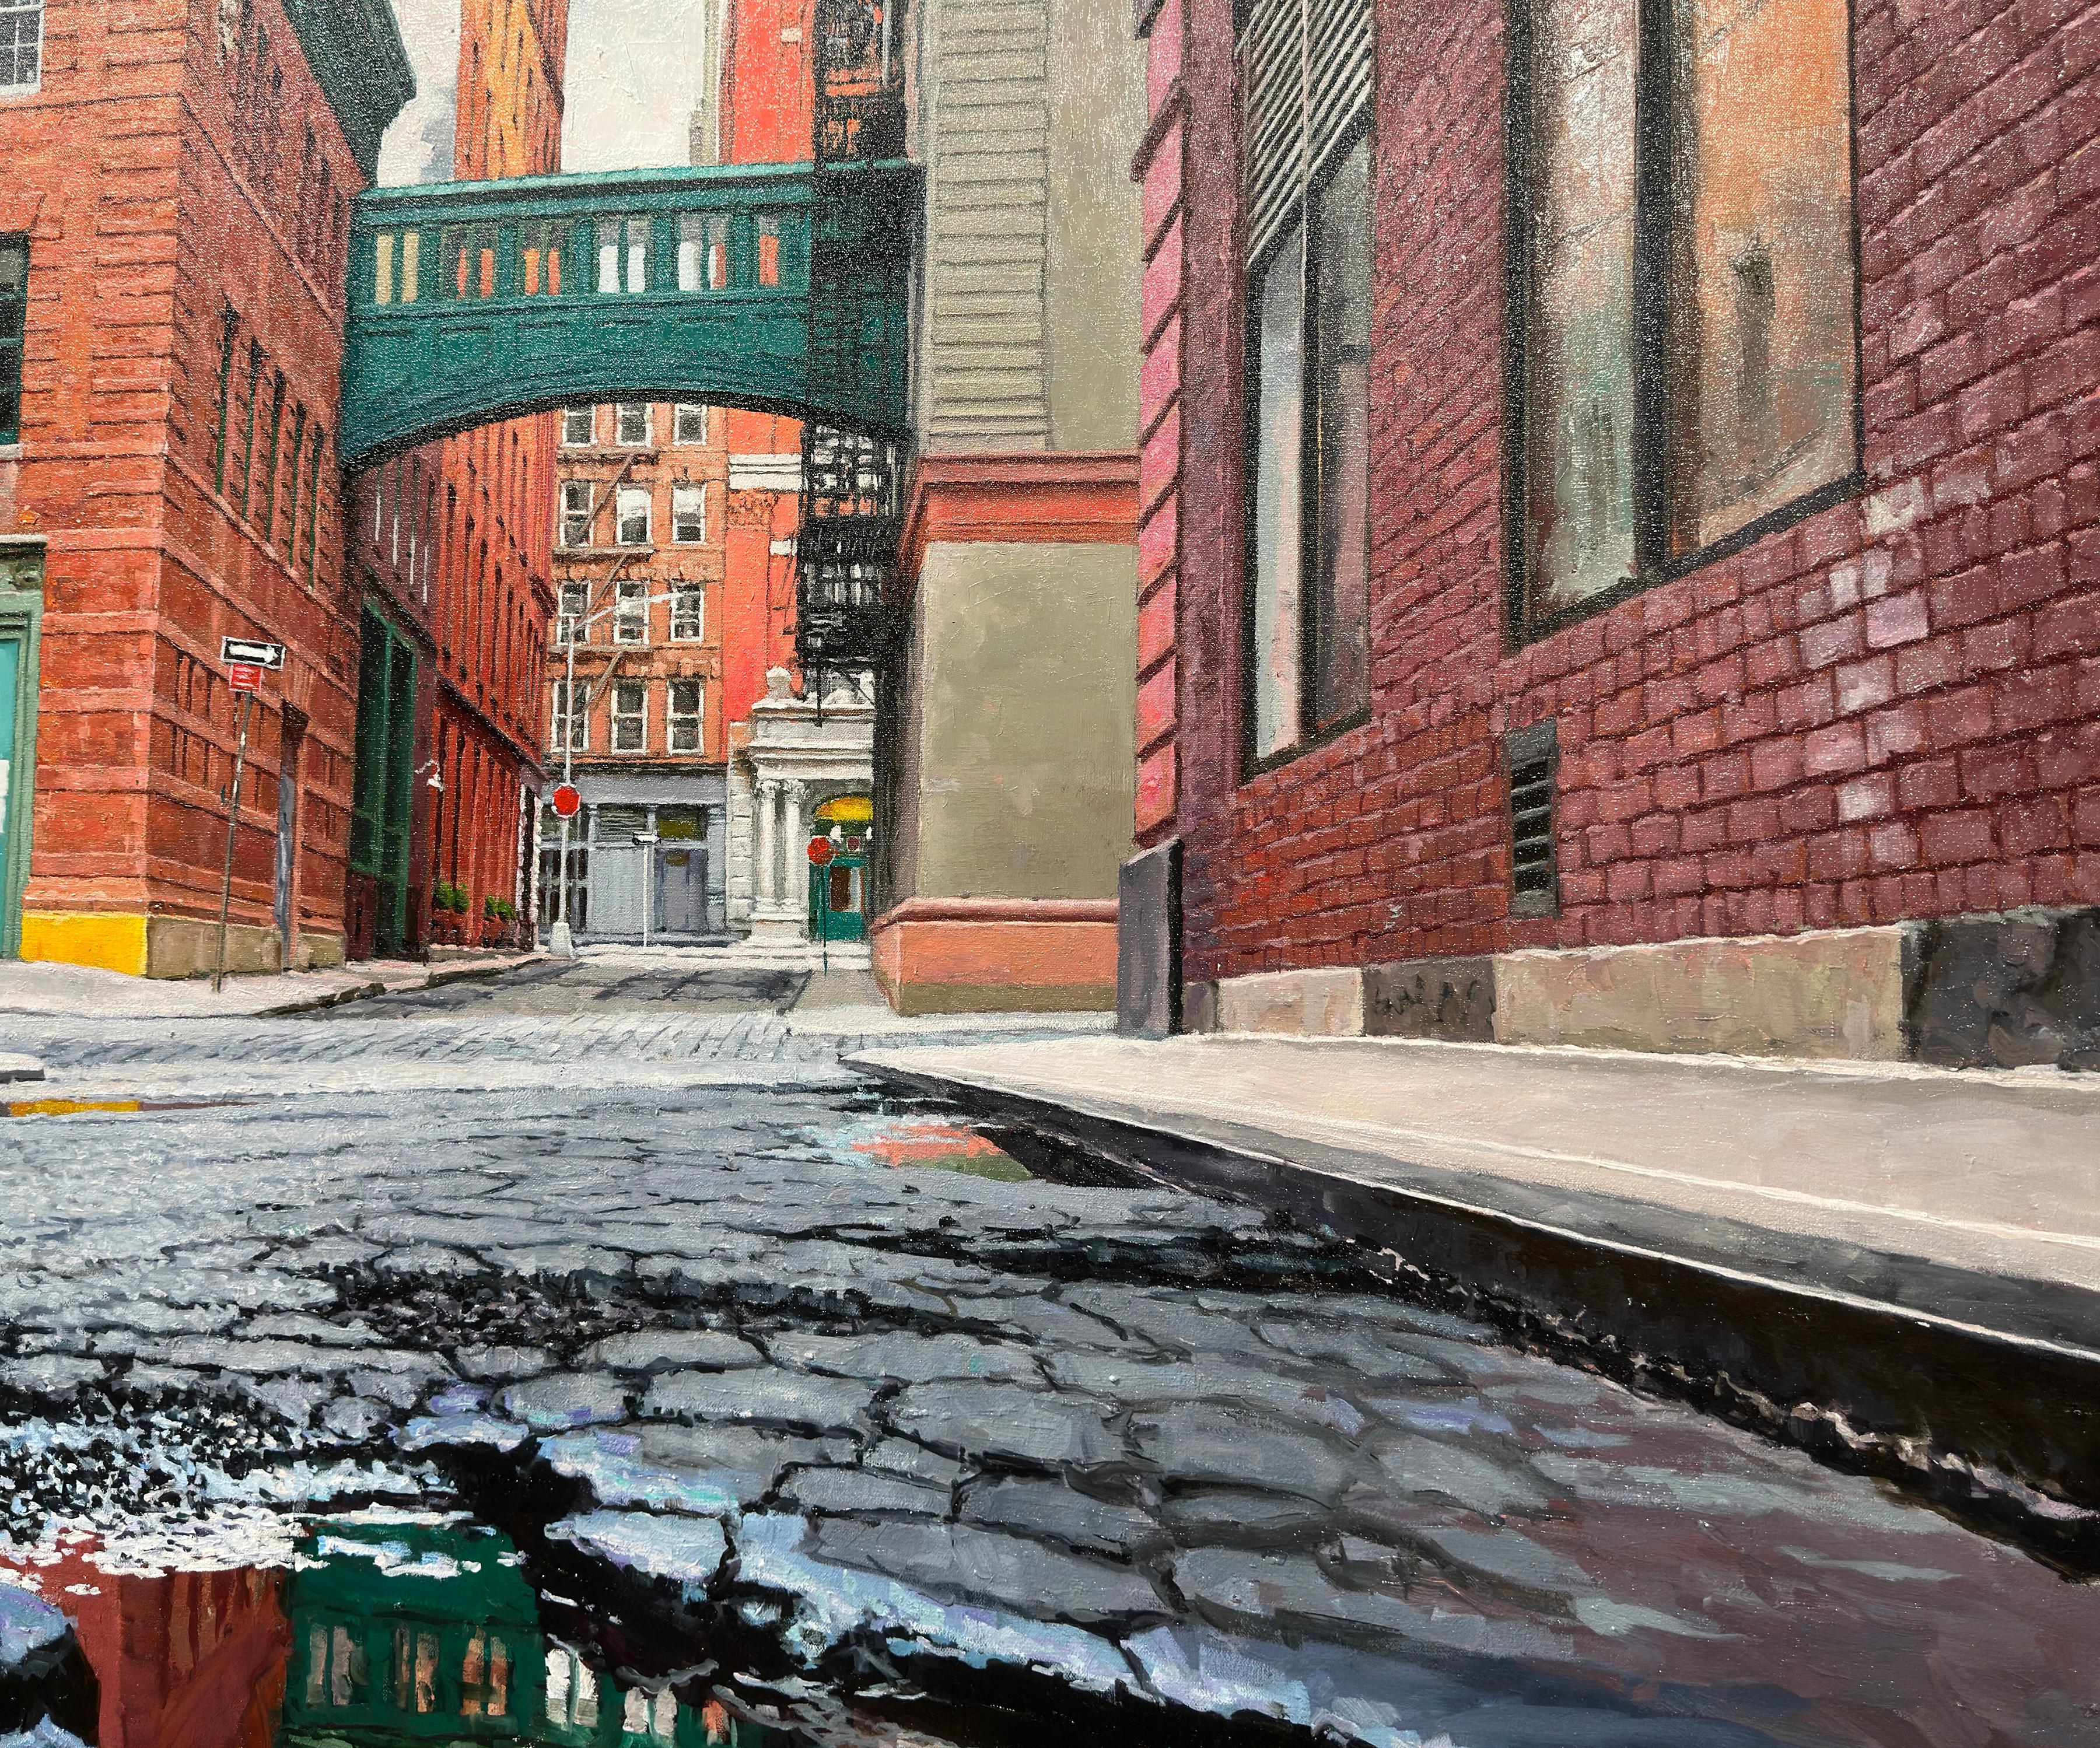 Original painting by Richard Combes
Quiet Manhattan puddles become networks of color and texture in the new oil paintings by Richard Combes. Timeworn streets make fertile subject matter for an artist whose painted surfaces are rich in detail. In